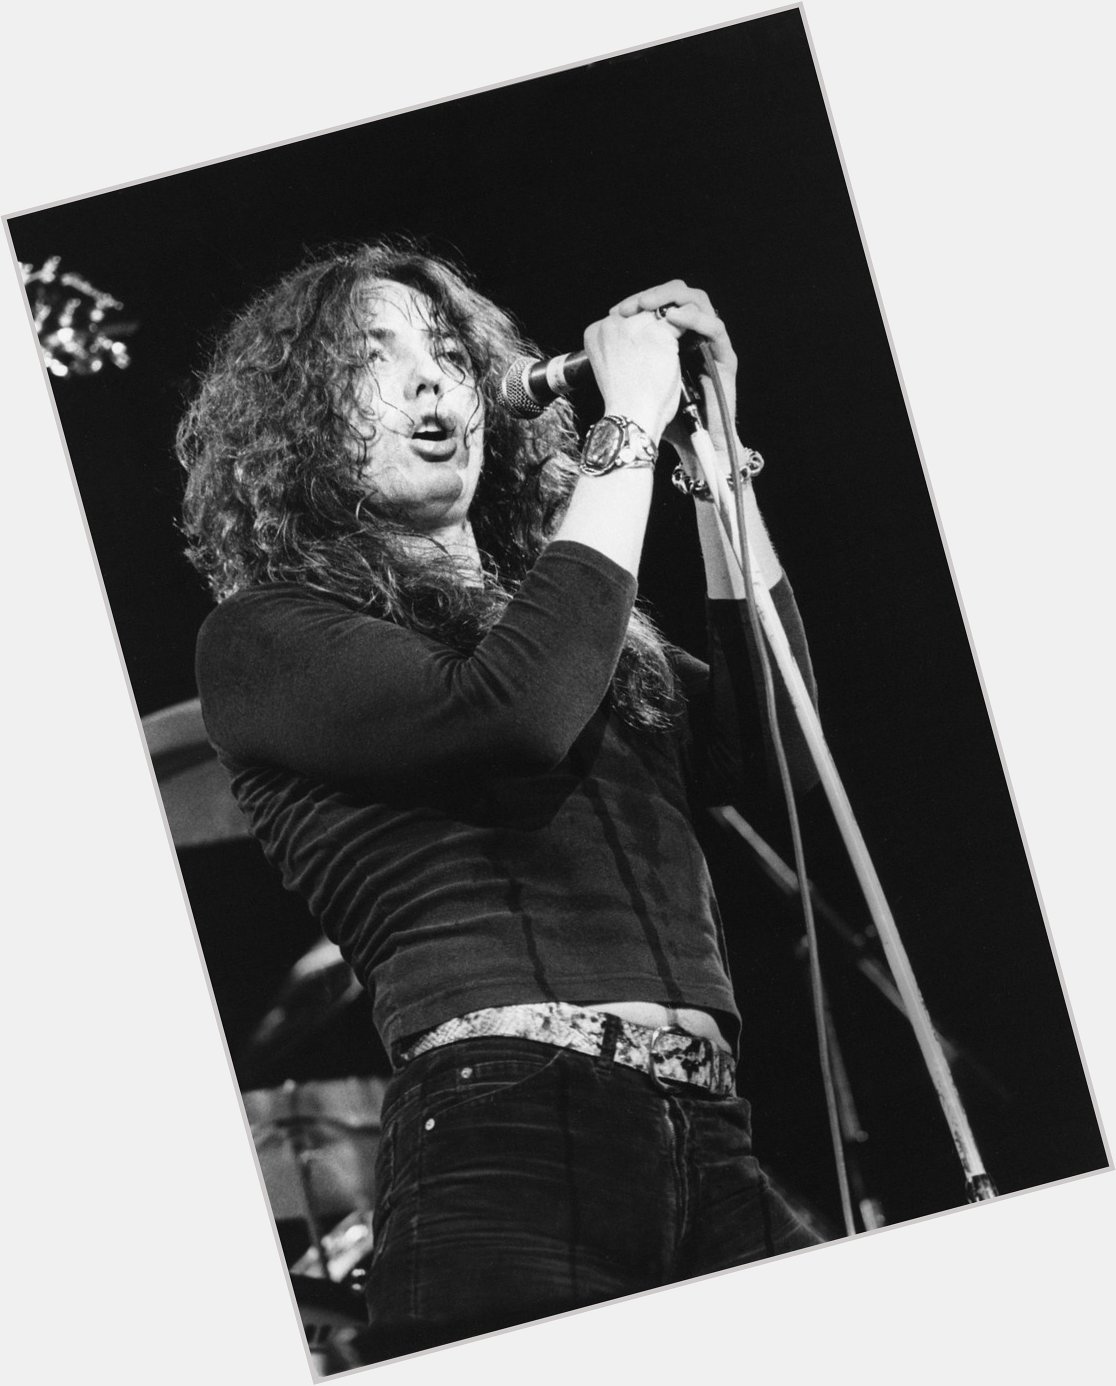 Wishing a happy birthday to the great David Coverdale 